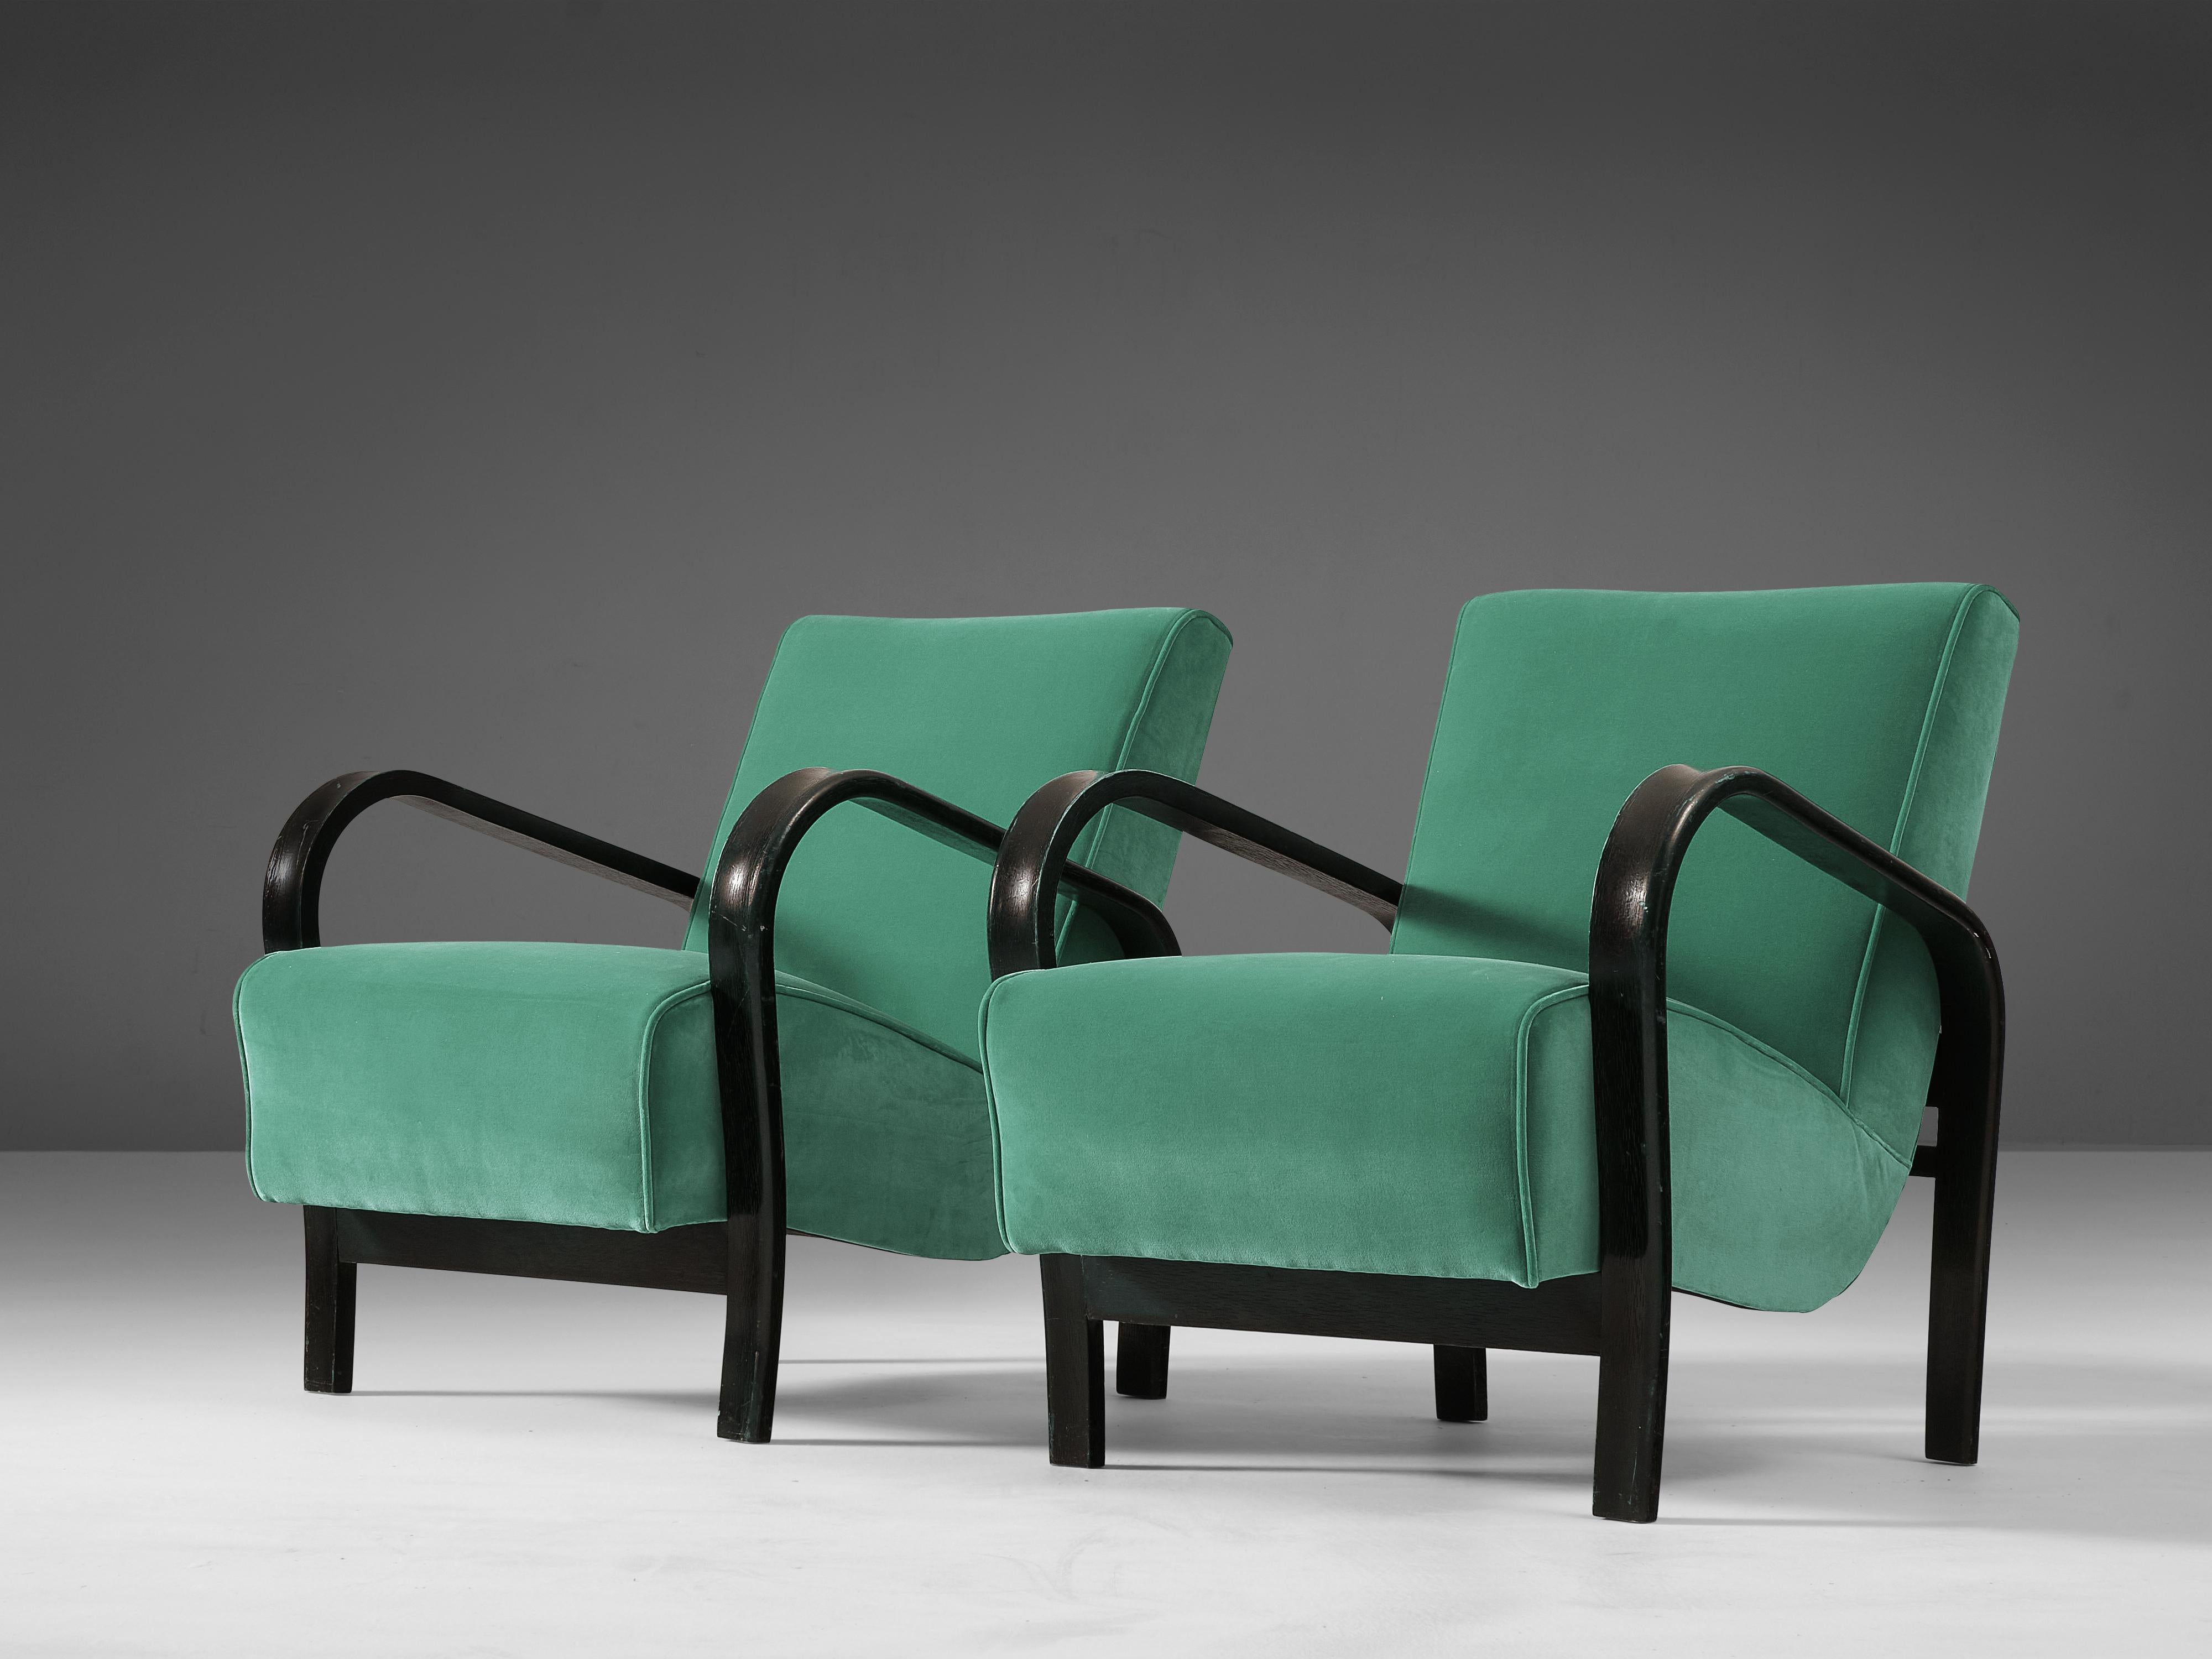 Jindrich Halabala, armchairs, wood, fabric, Czech Republic, 1930s.

Dynamic armchairs with beautiful fluent armrests. The main feature of these chairs are the voluptuous curved armrests that are so typical for Halabala. Thanks to these bended